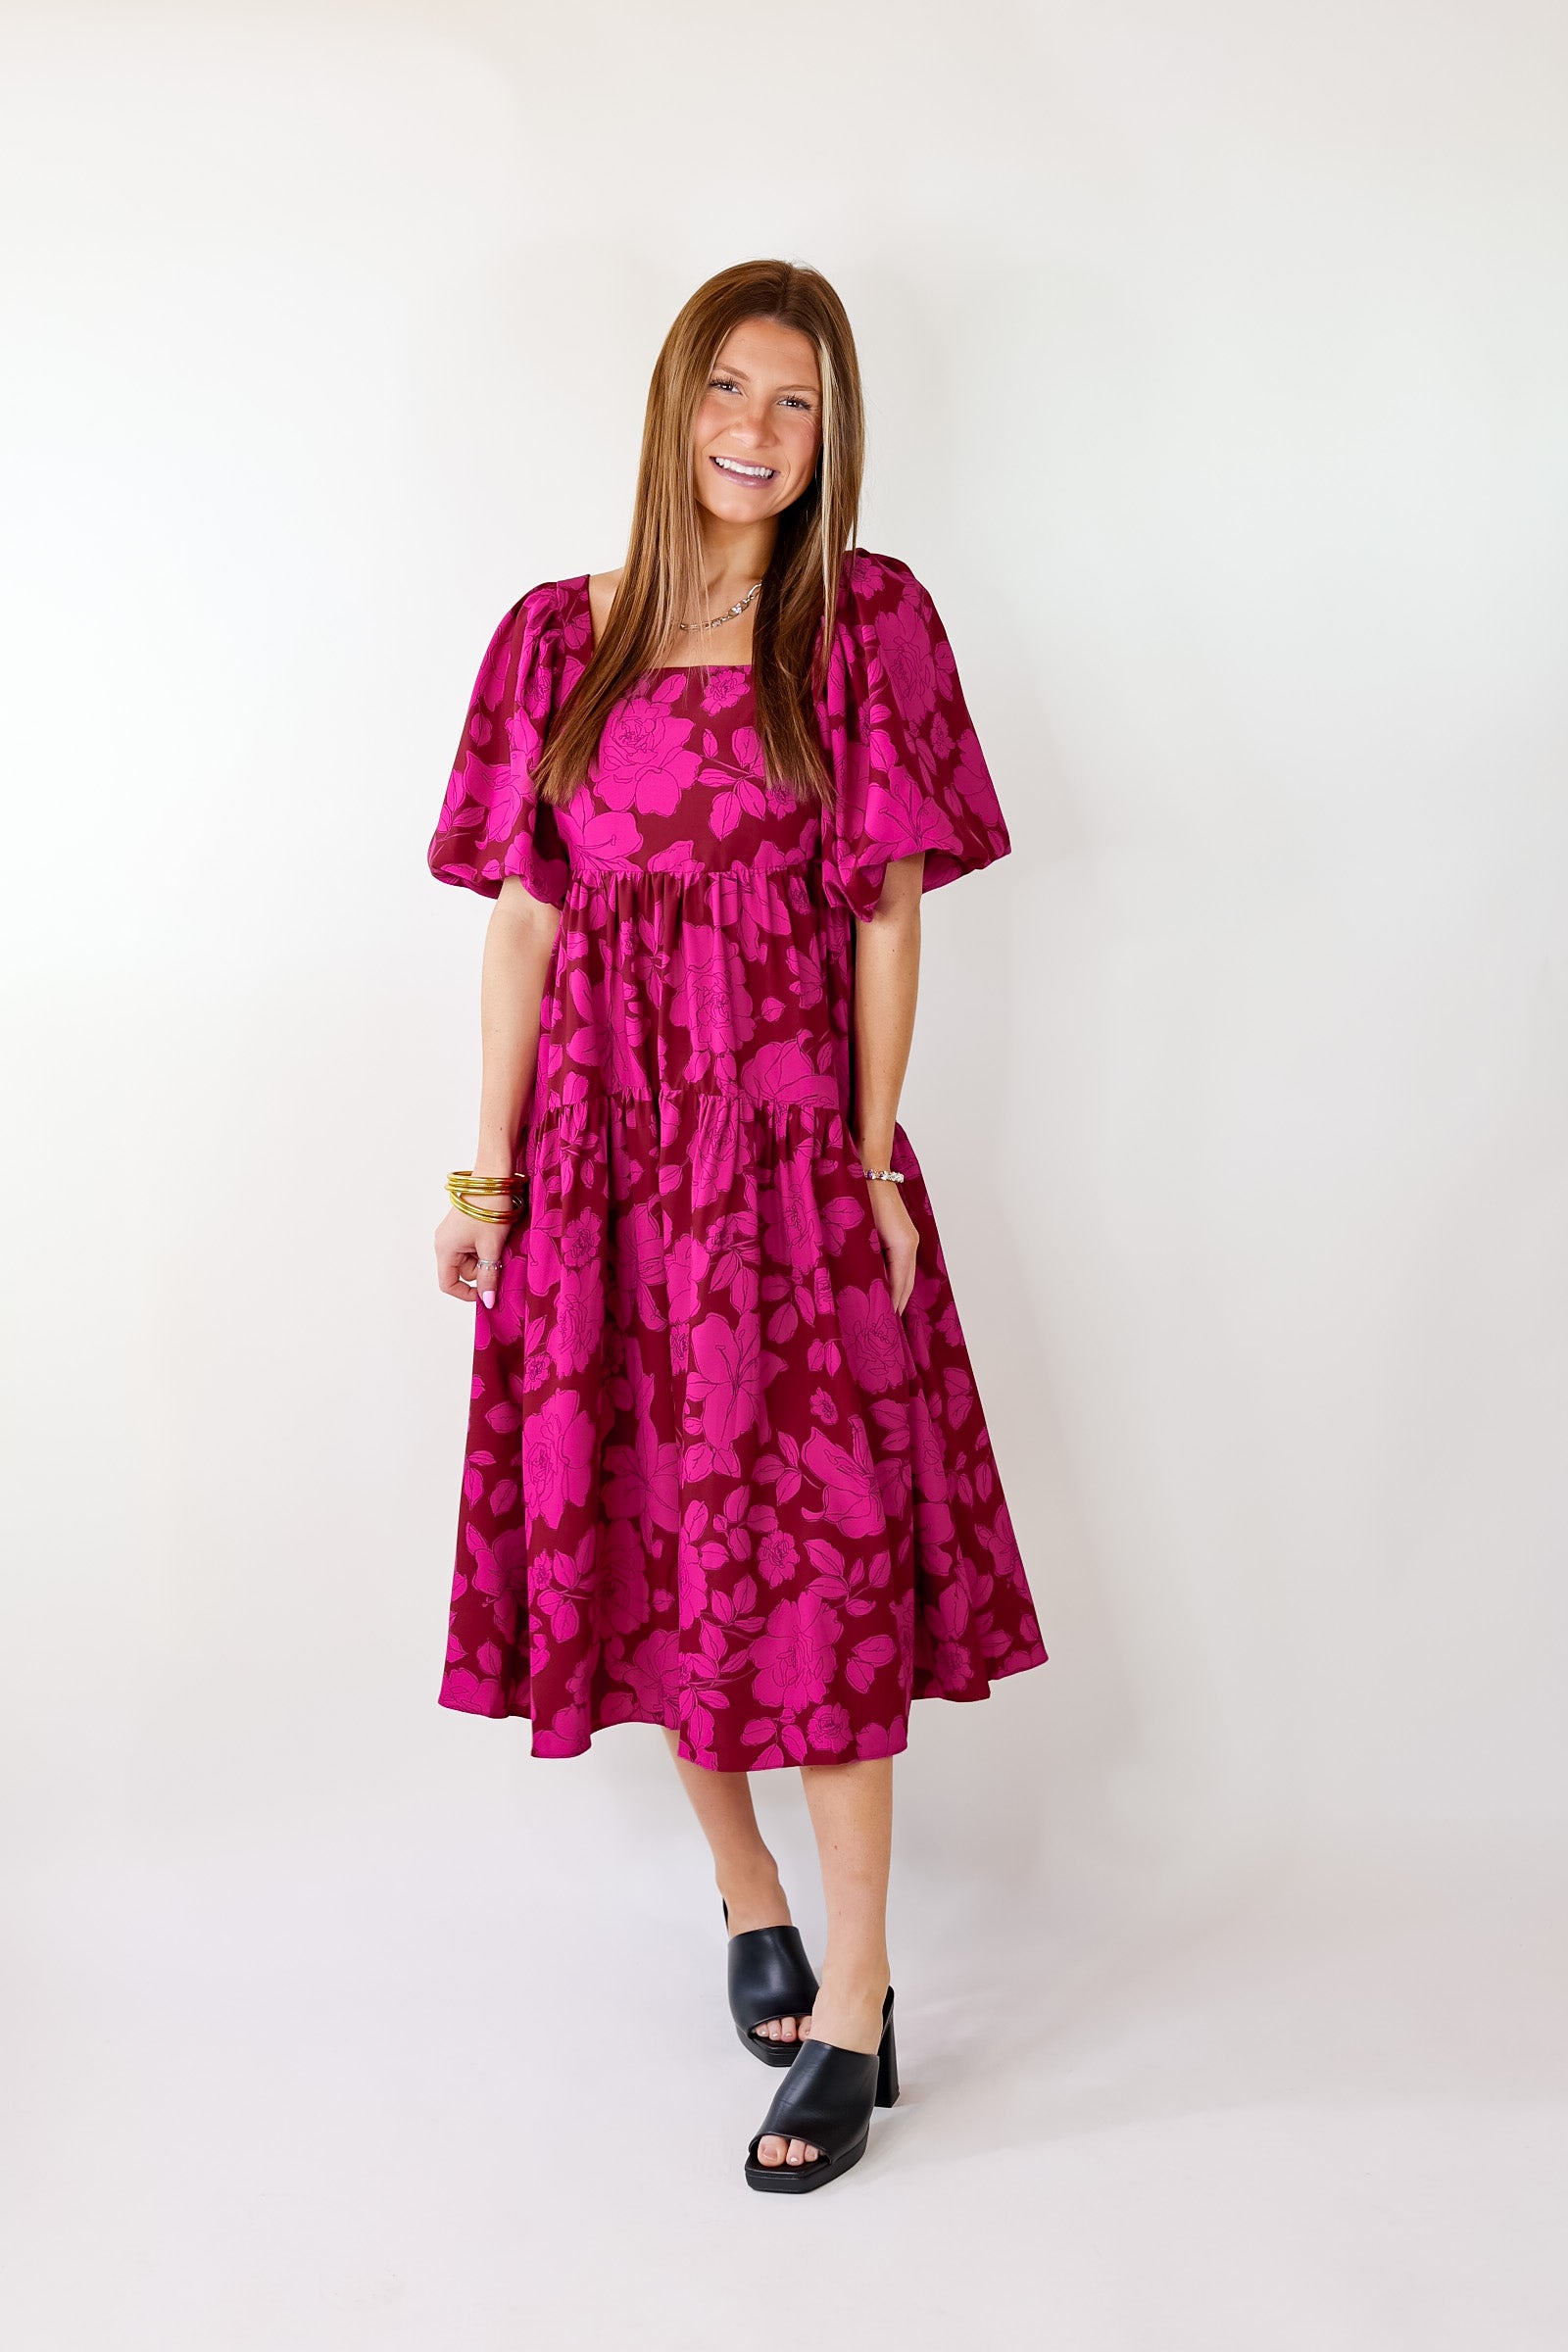 Floral Fascination Tiered Midi Dress In Brick Red and Pink - Giddy Up Glamour Boutique